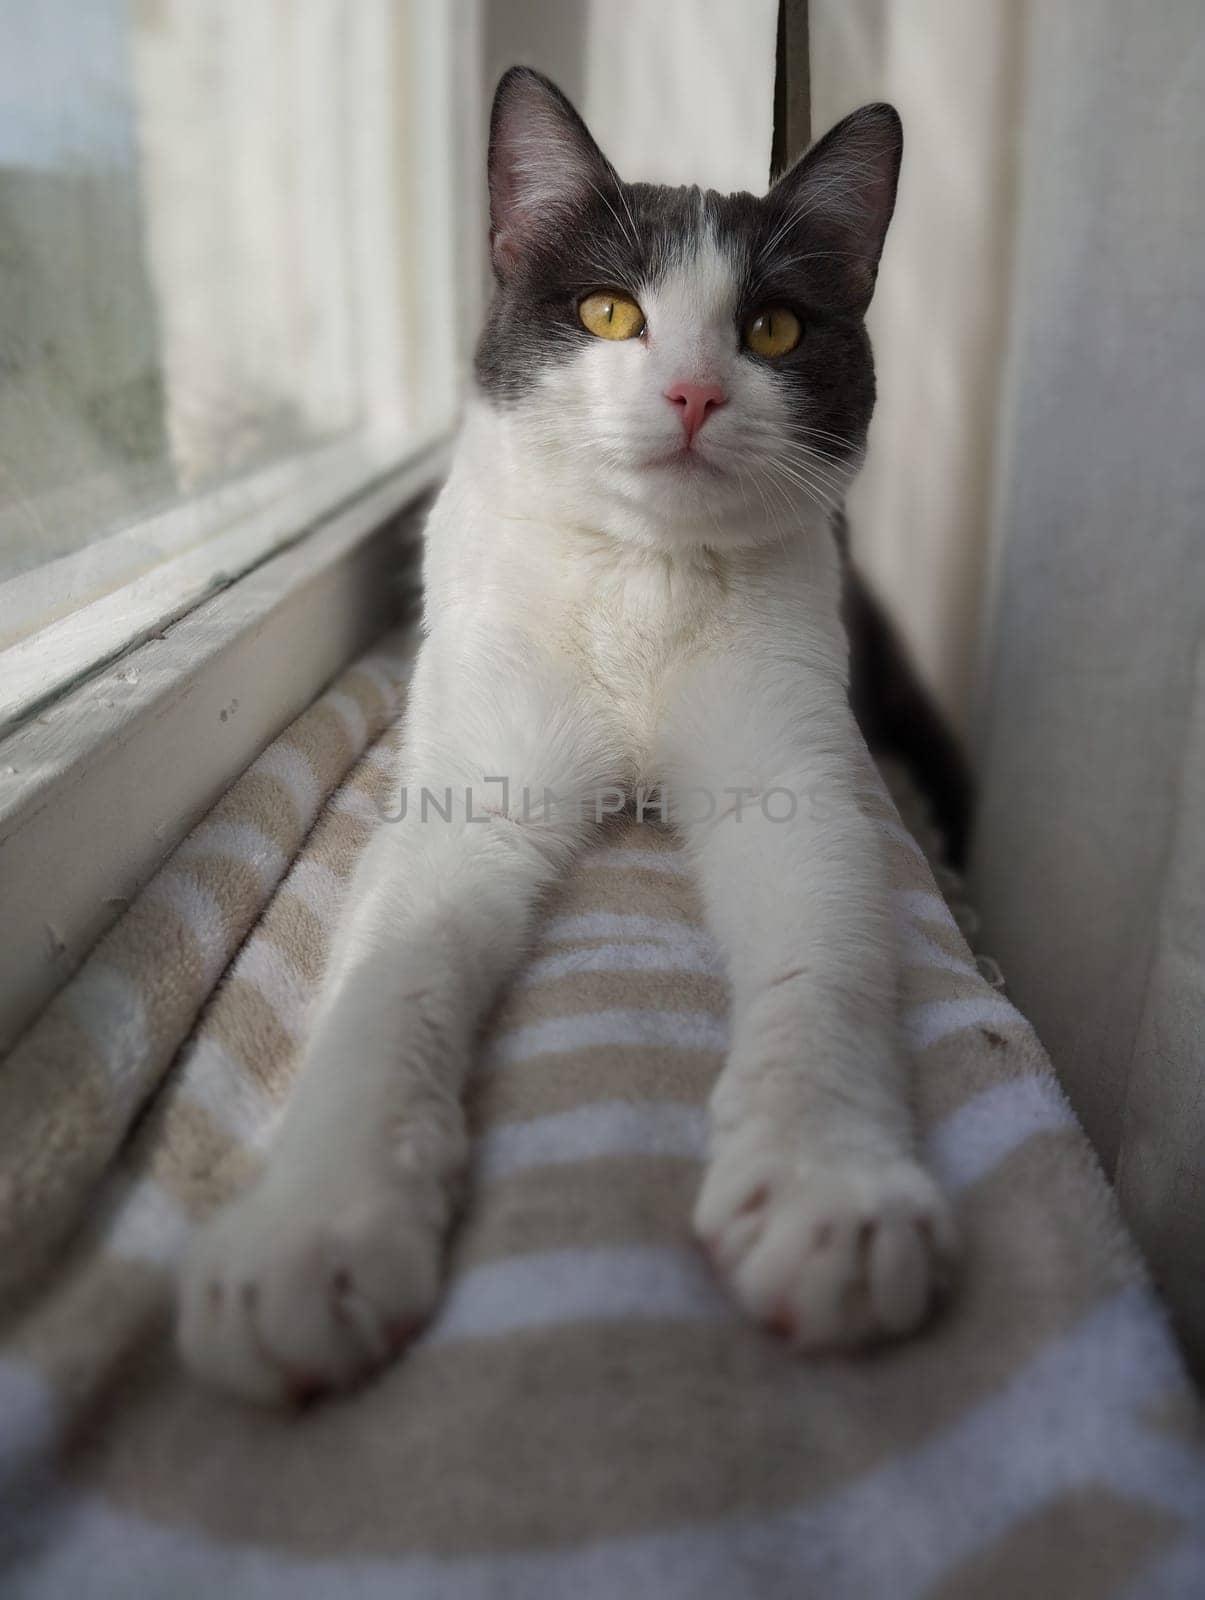 A clean and tidy cat is resting, lying on the window. Young cat with gray-white coat color. Vertical photo format